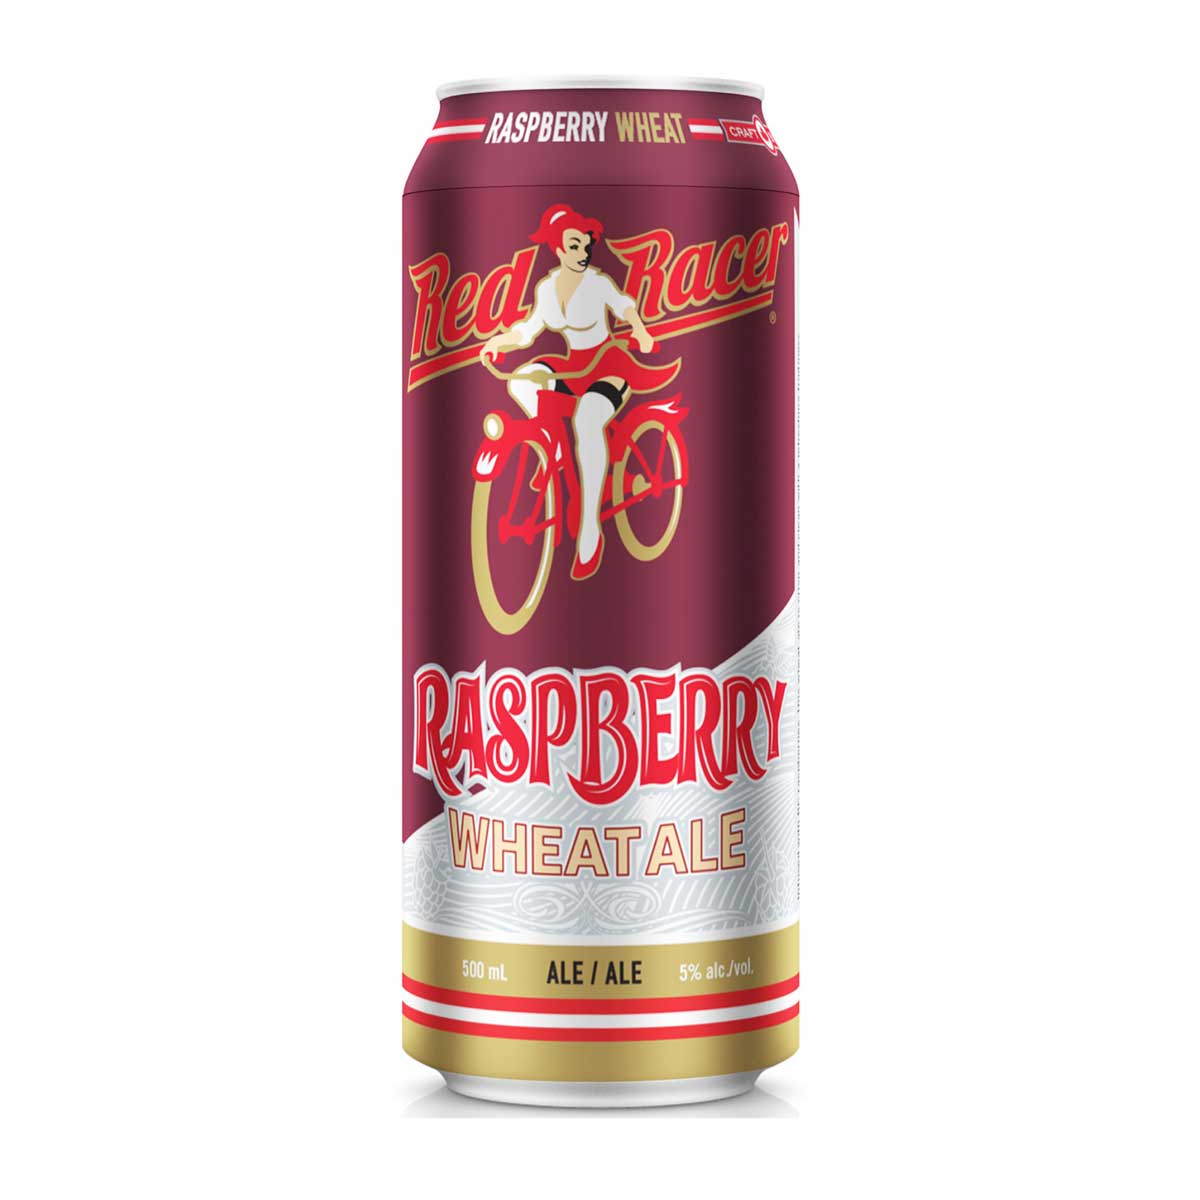 TAG Liquor Stores BC - Red Racer Raspberry Wheat Ale Single Tall Can